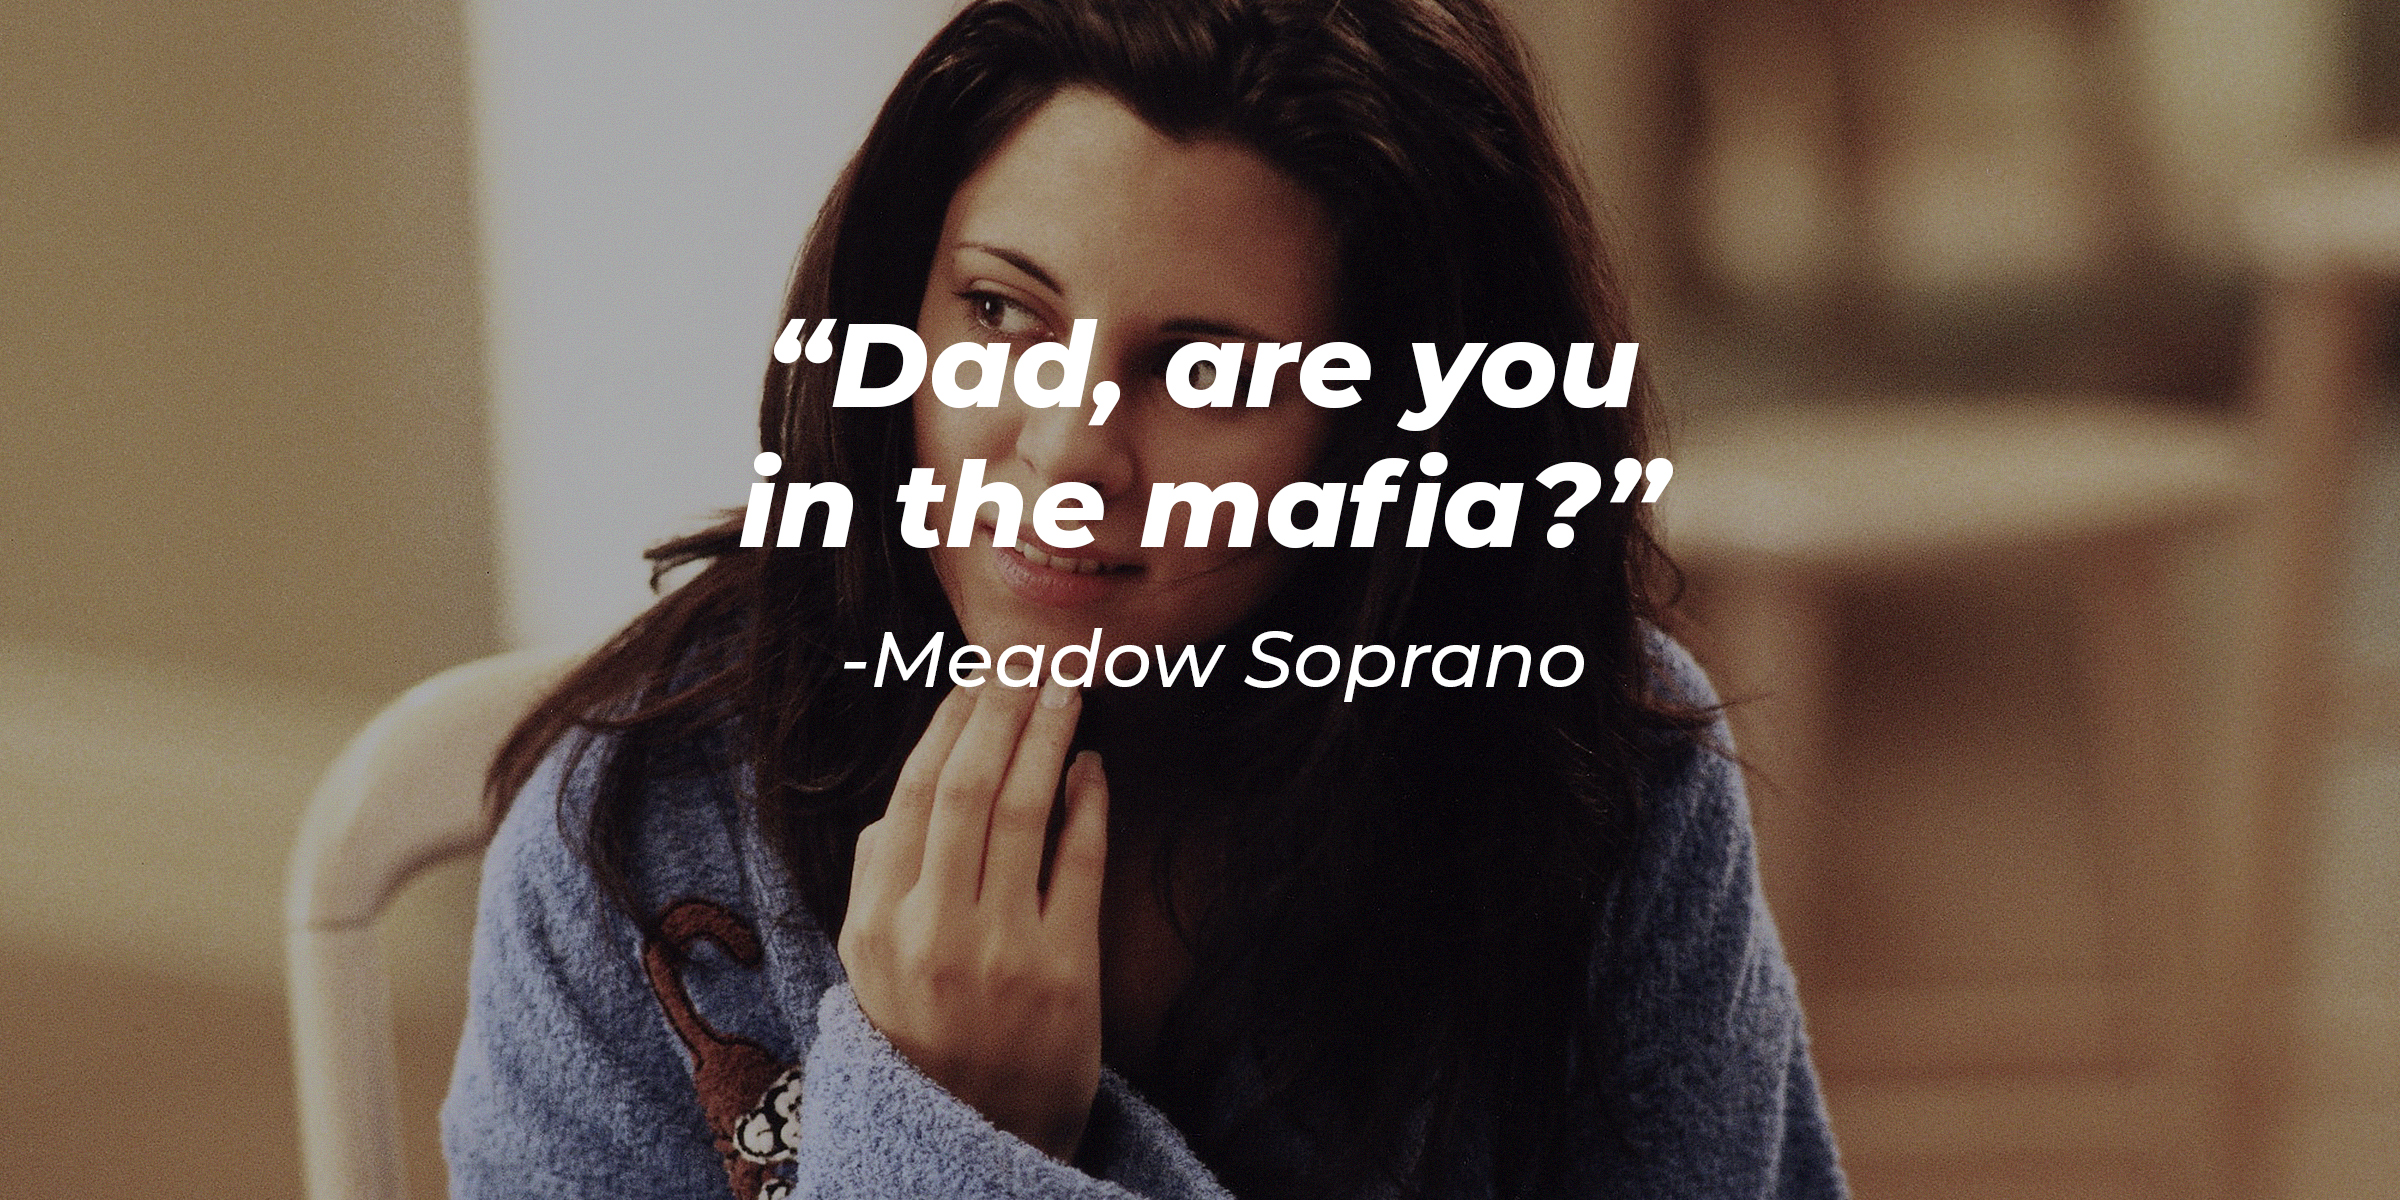 Meadow Soprano with her quote: "Dad, are you in the mafia?" | Source: facebook.com/TheSopranos